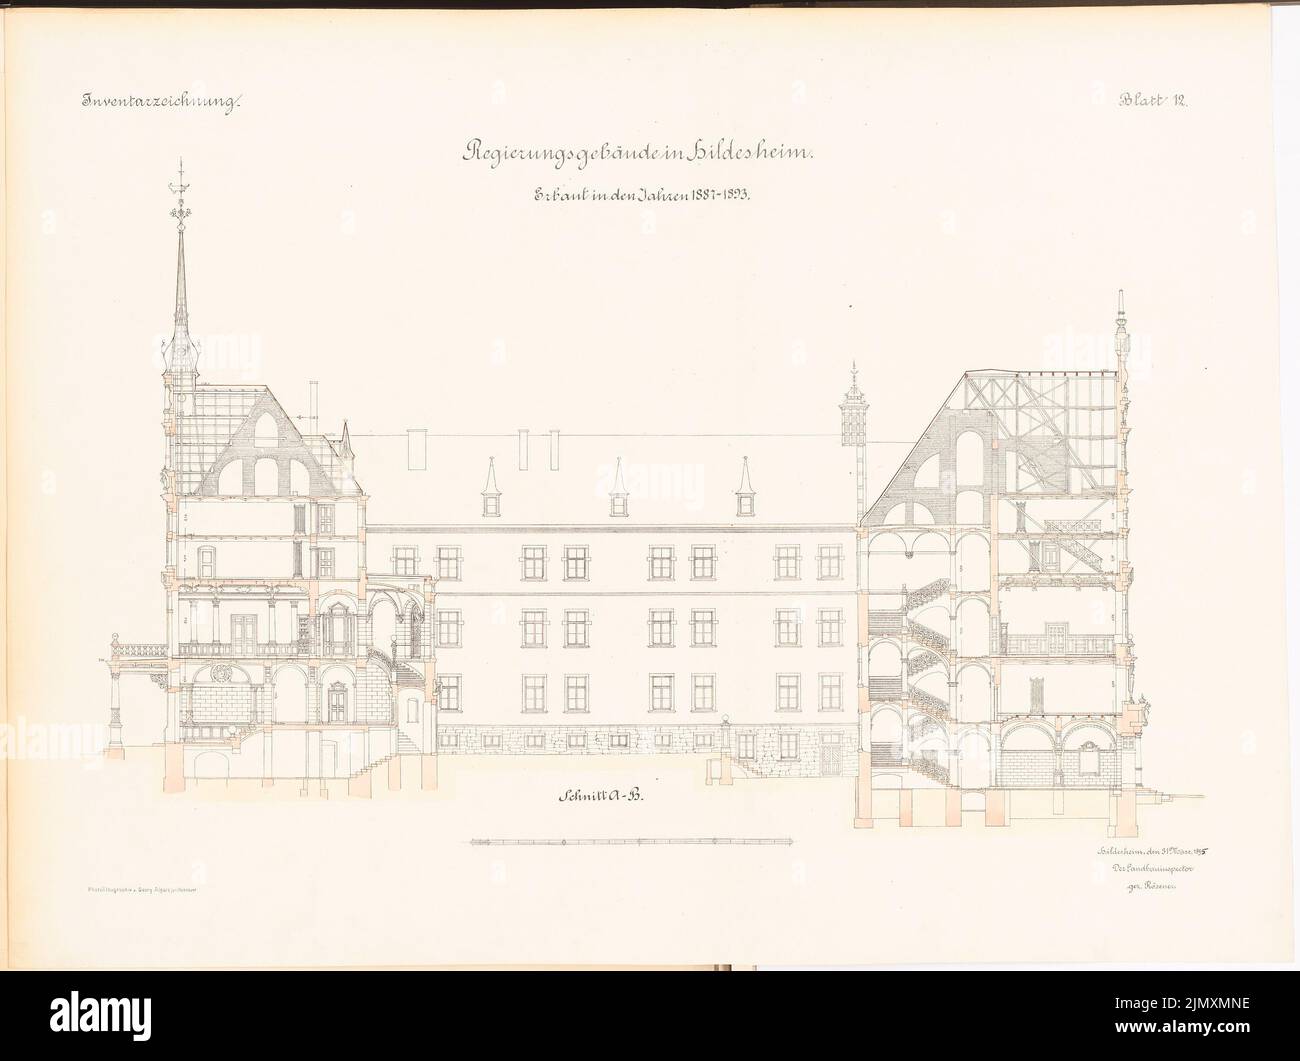 Unknown architect, government building in Hildesheim (approx. 1895/1896): Cut. Lithograph colored on paper, 64 x 85.7 cm (including scan edges) Stock Photo